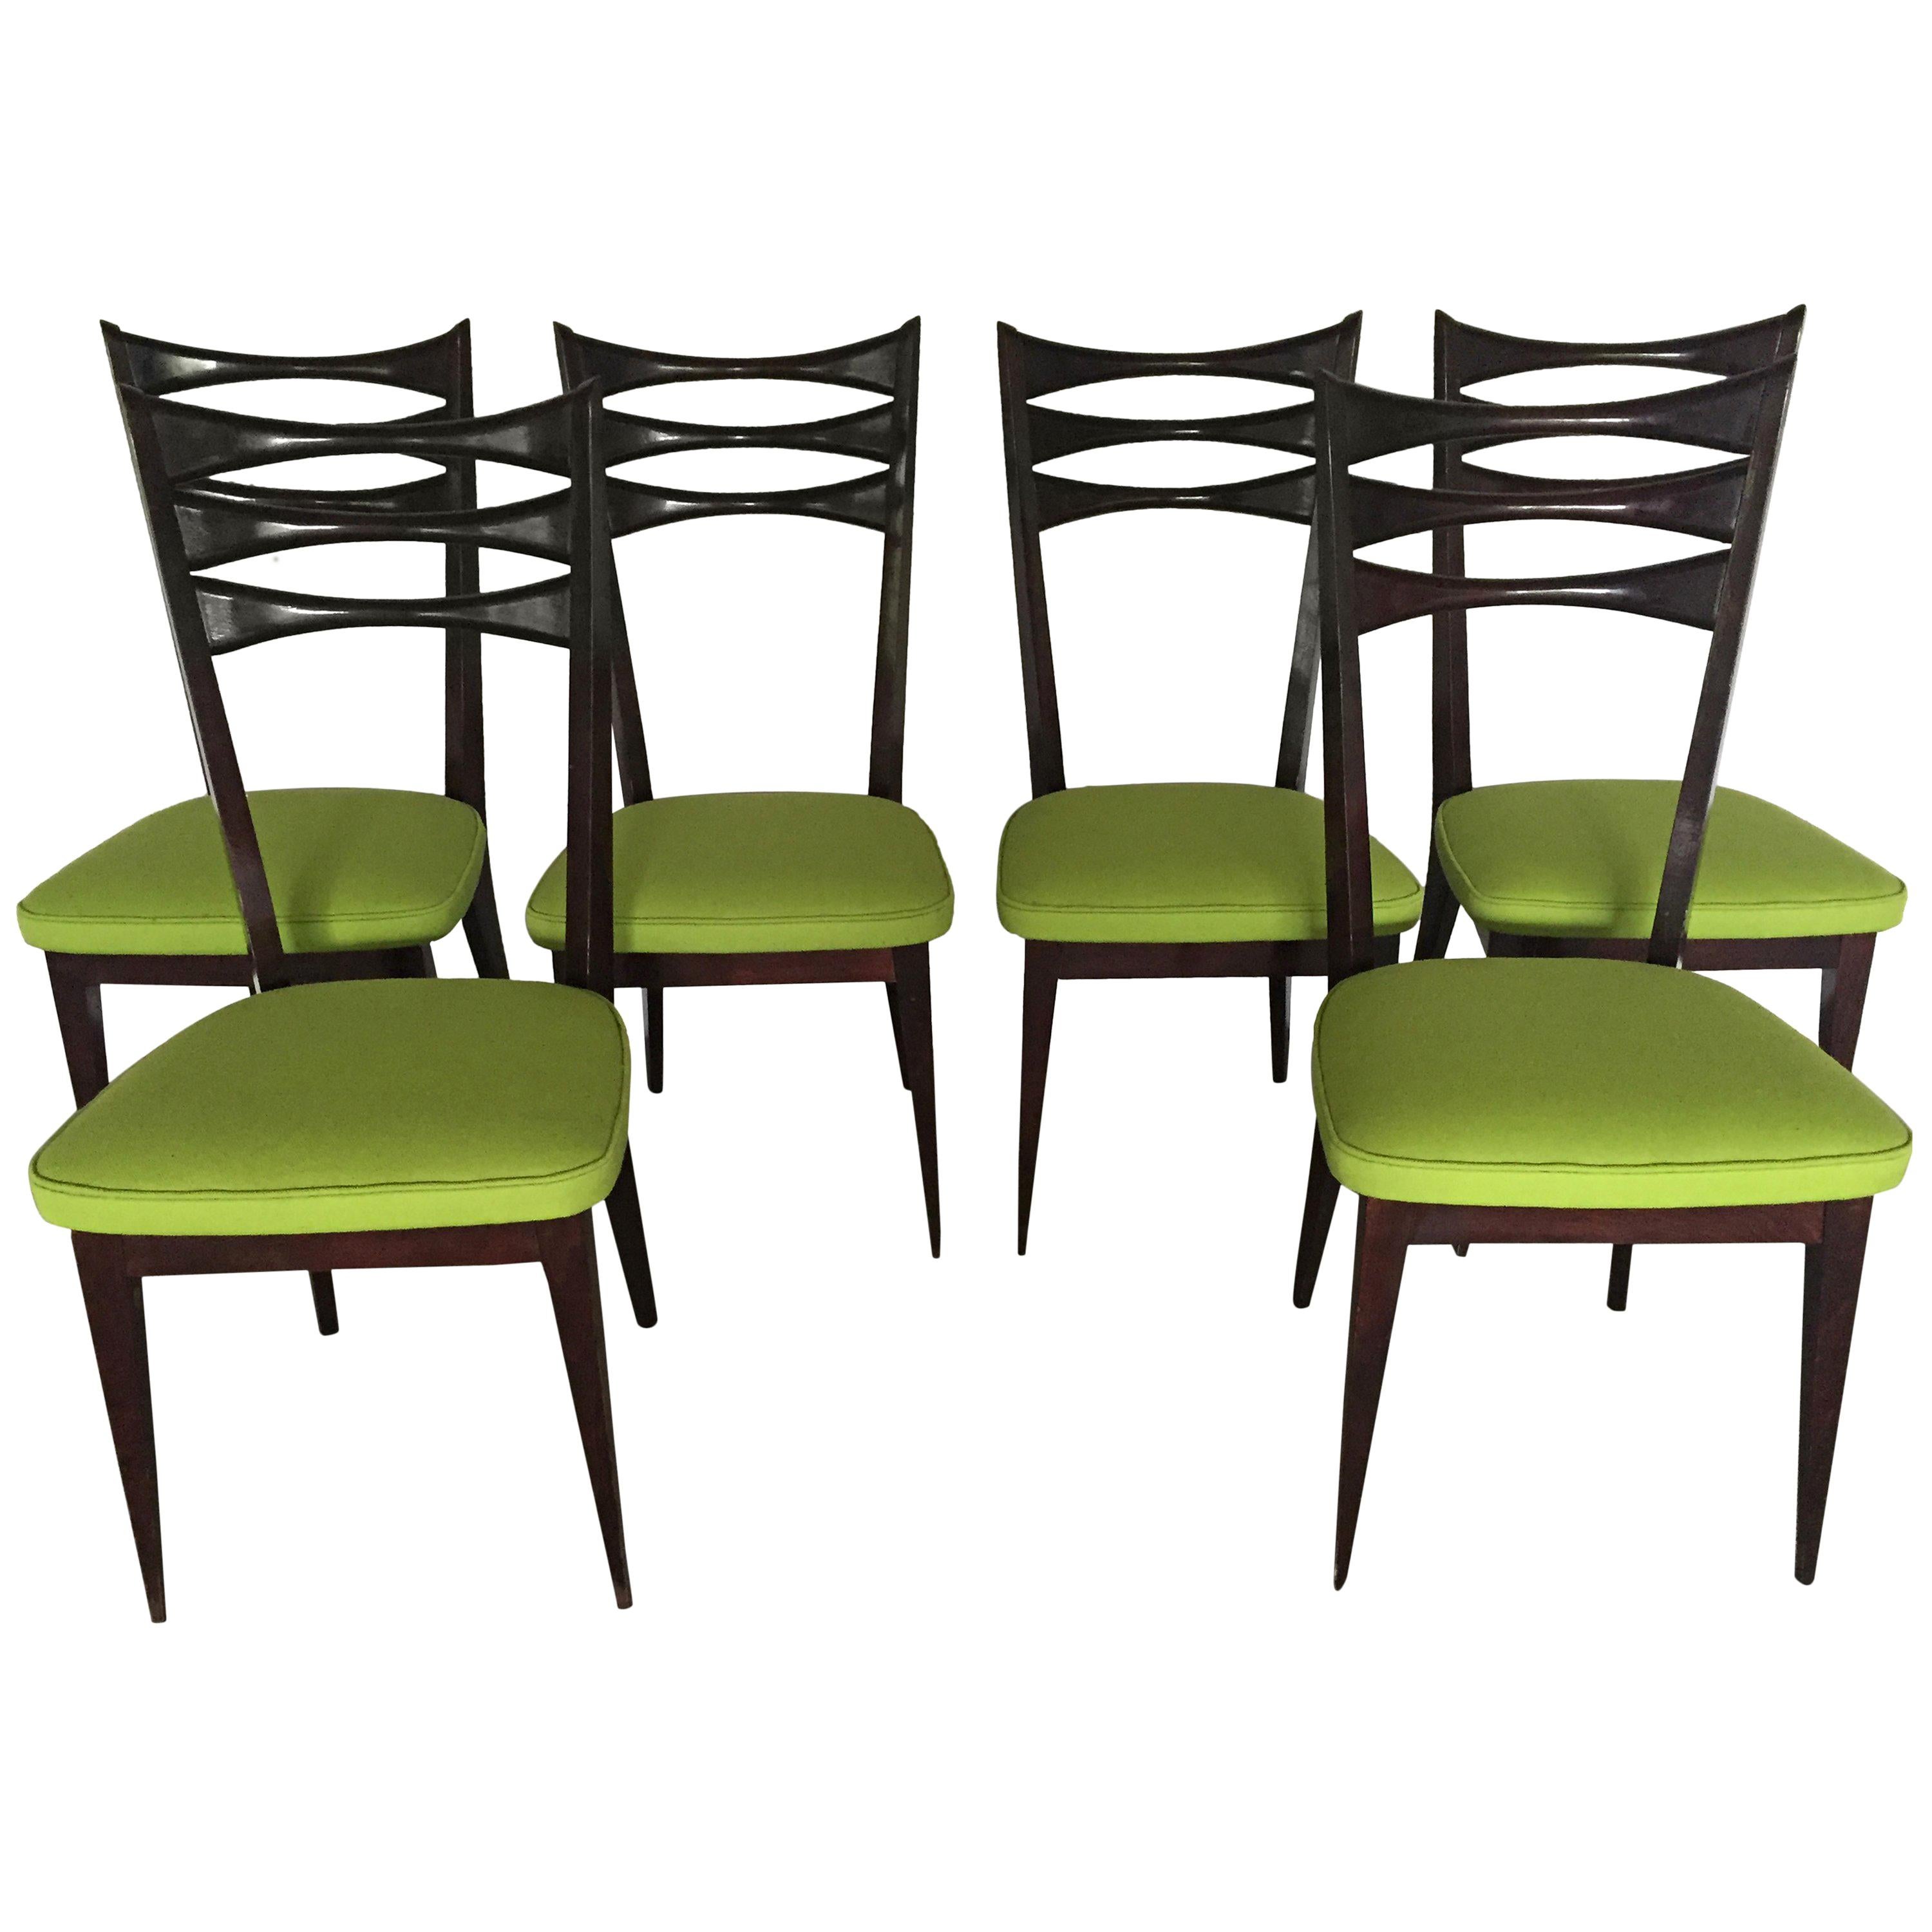 Vintage Set of Six Chairs by Stella, France